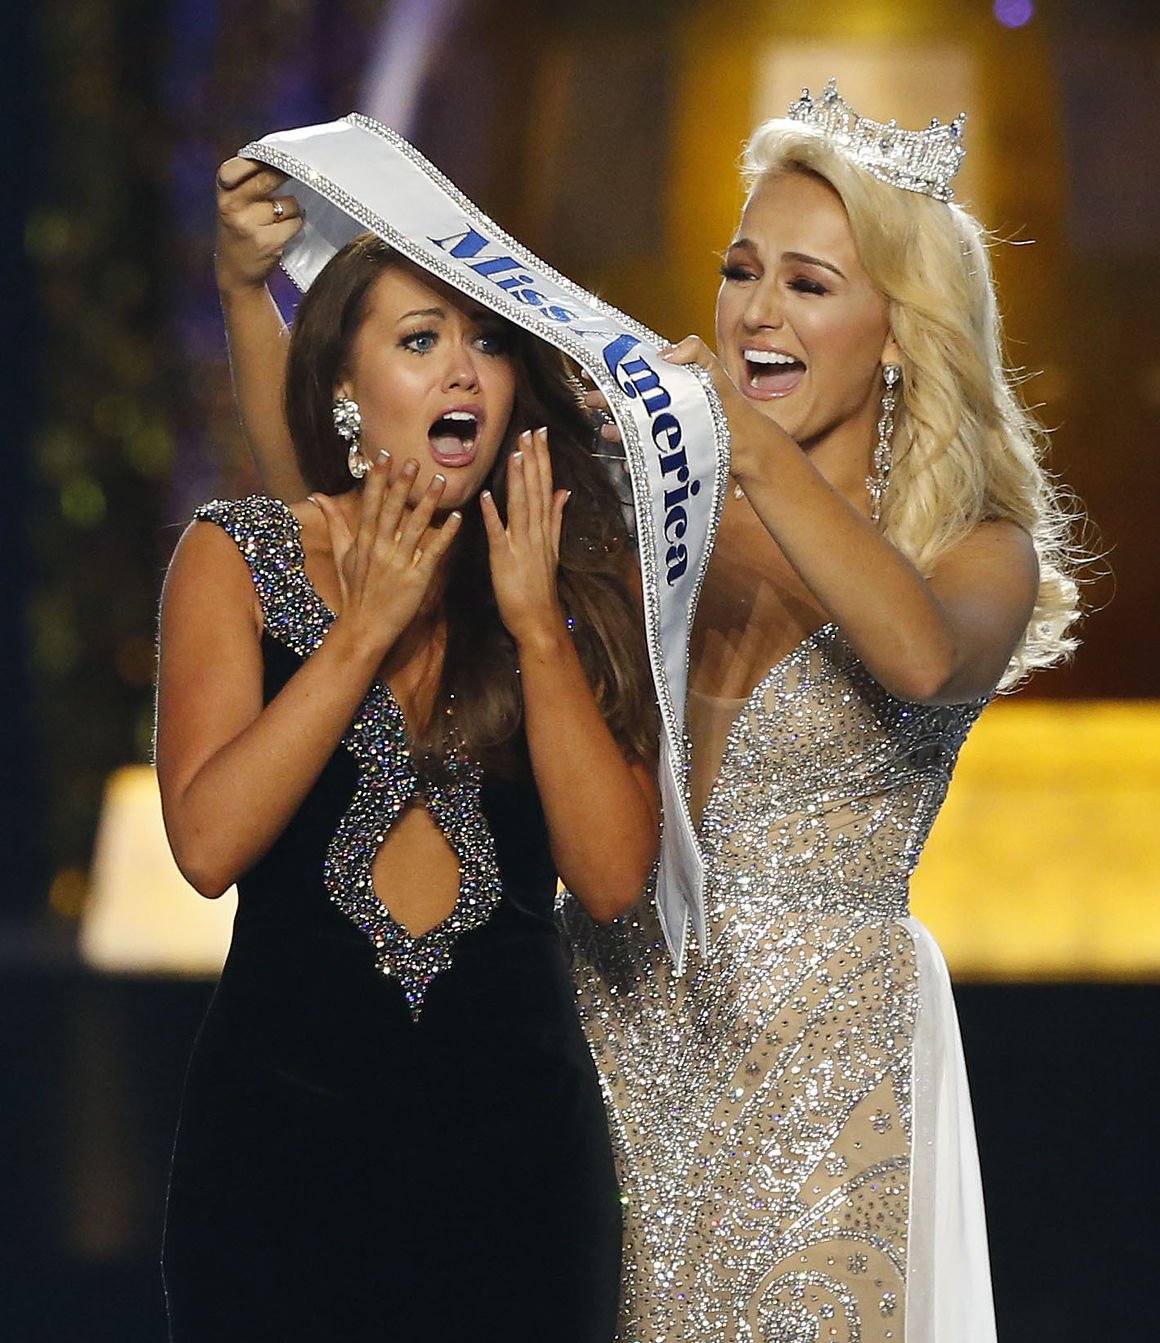 The Message Our Kids Receive From the Miss America Pageant 